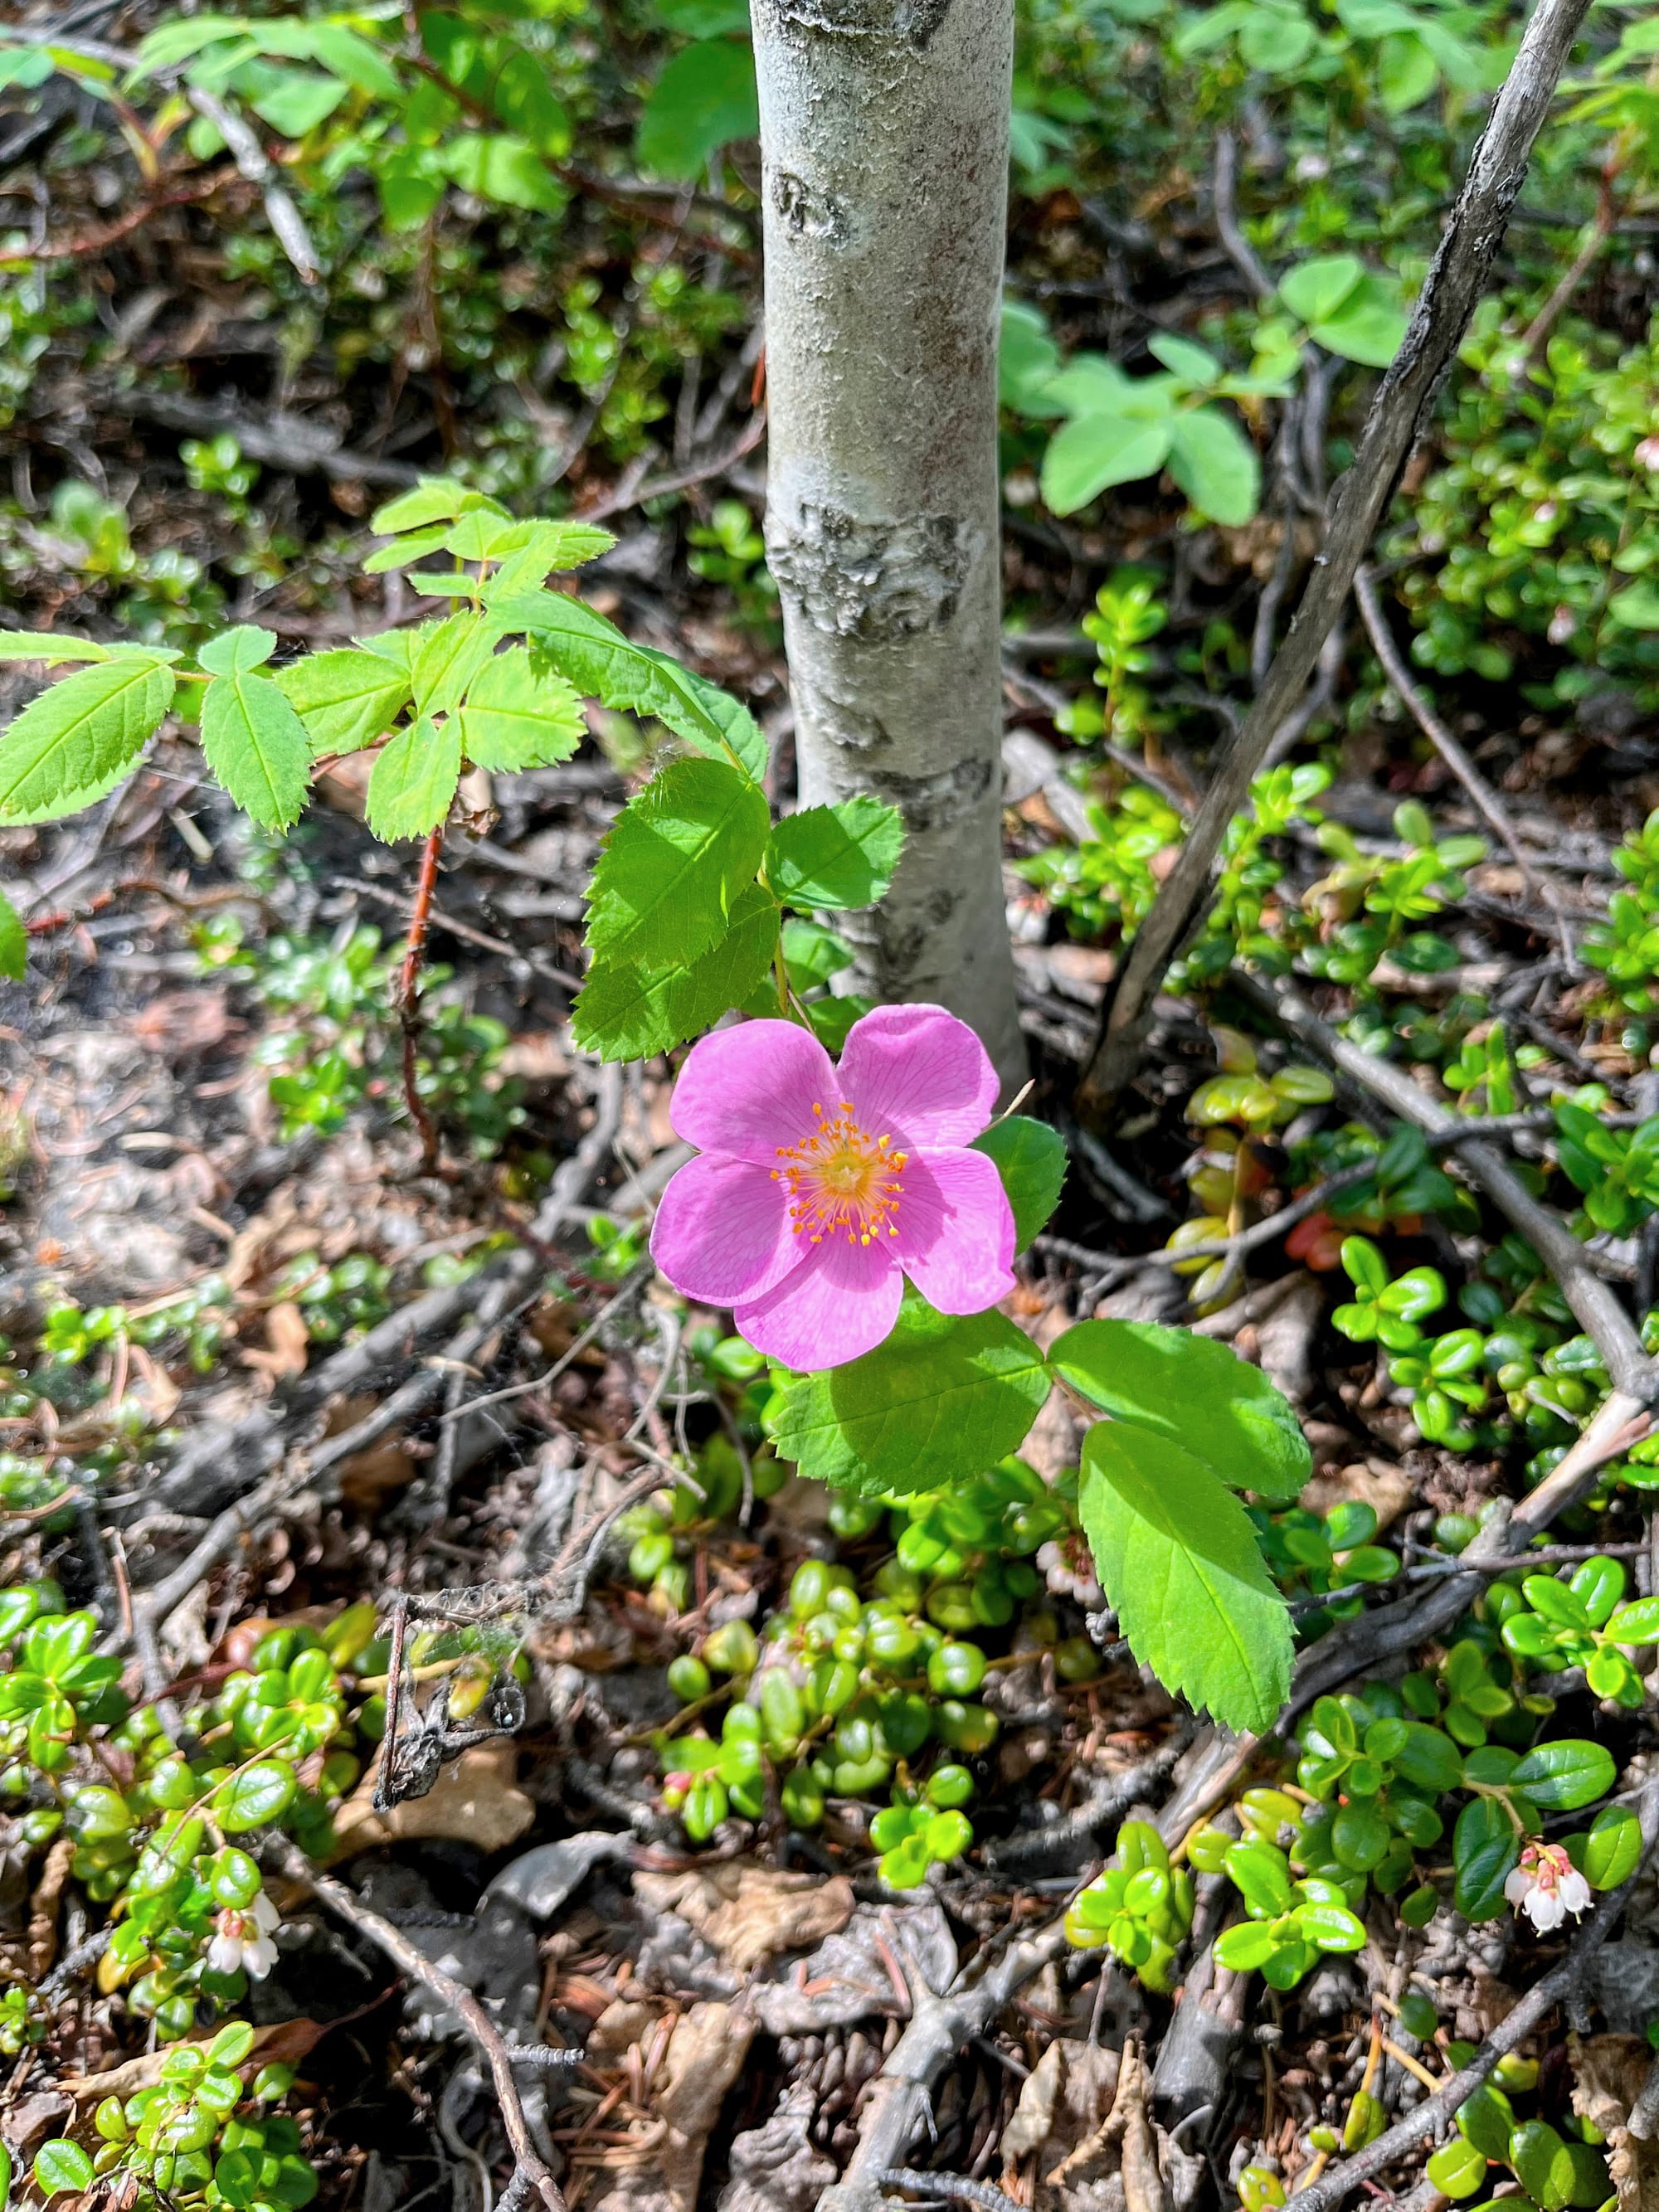 A wild rose growing in the woods.